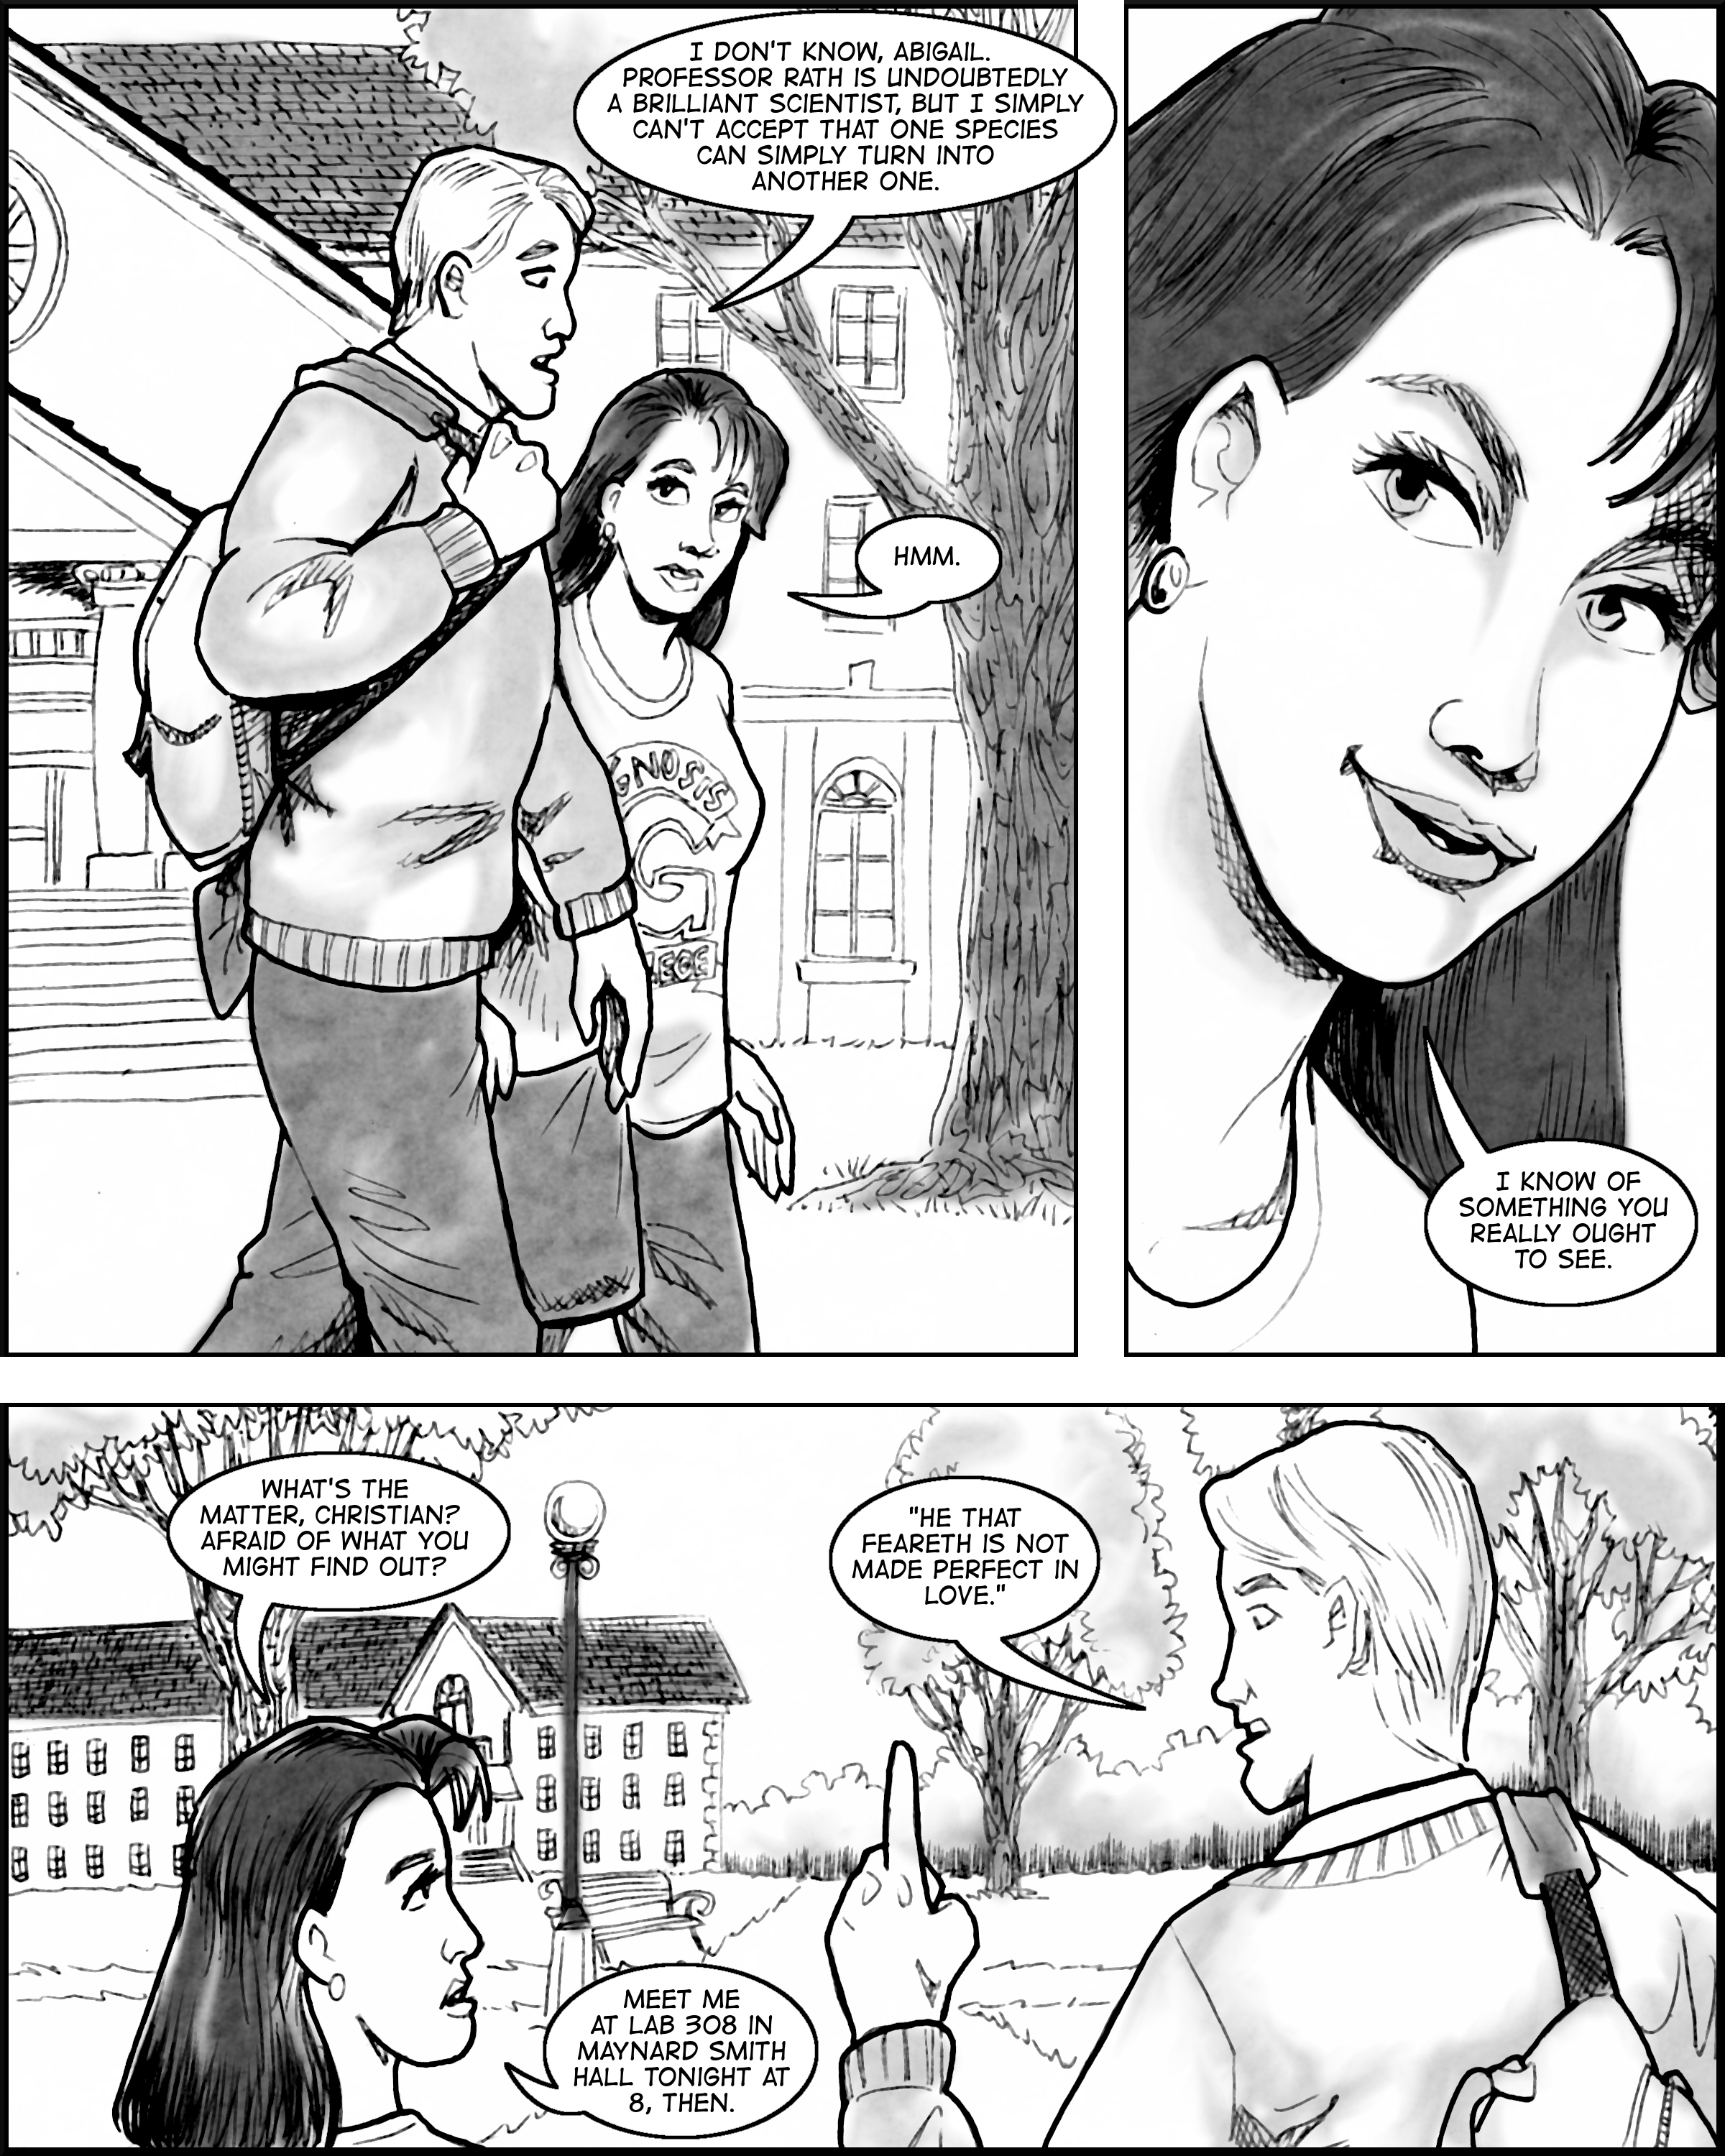 Abigail makes a very strange invitation to Christian as the stroll across campus.